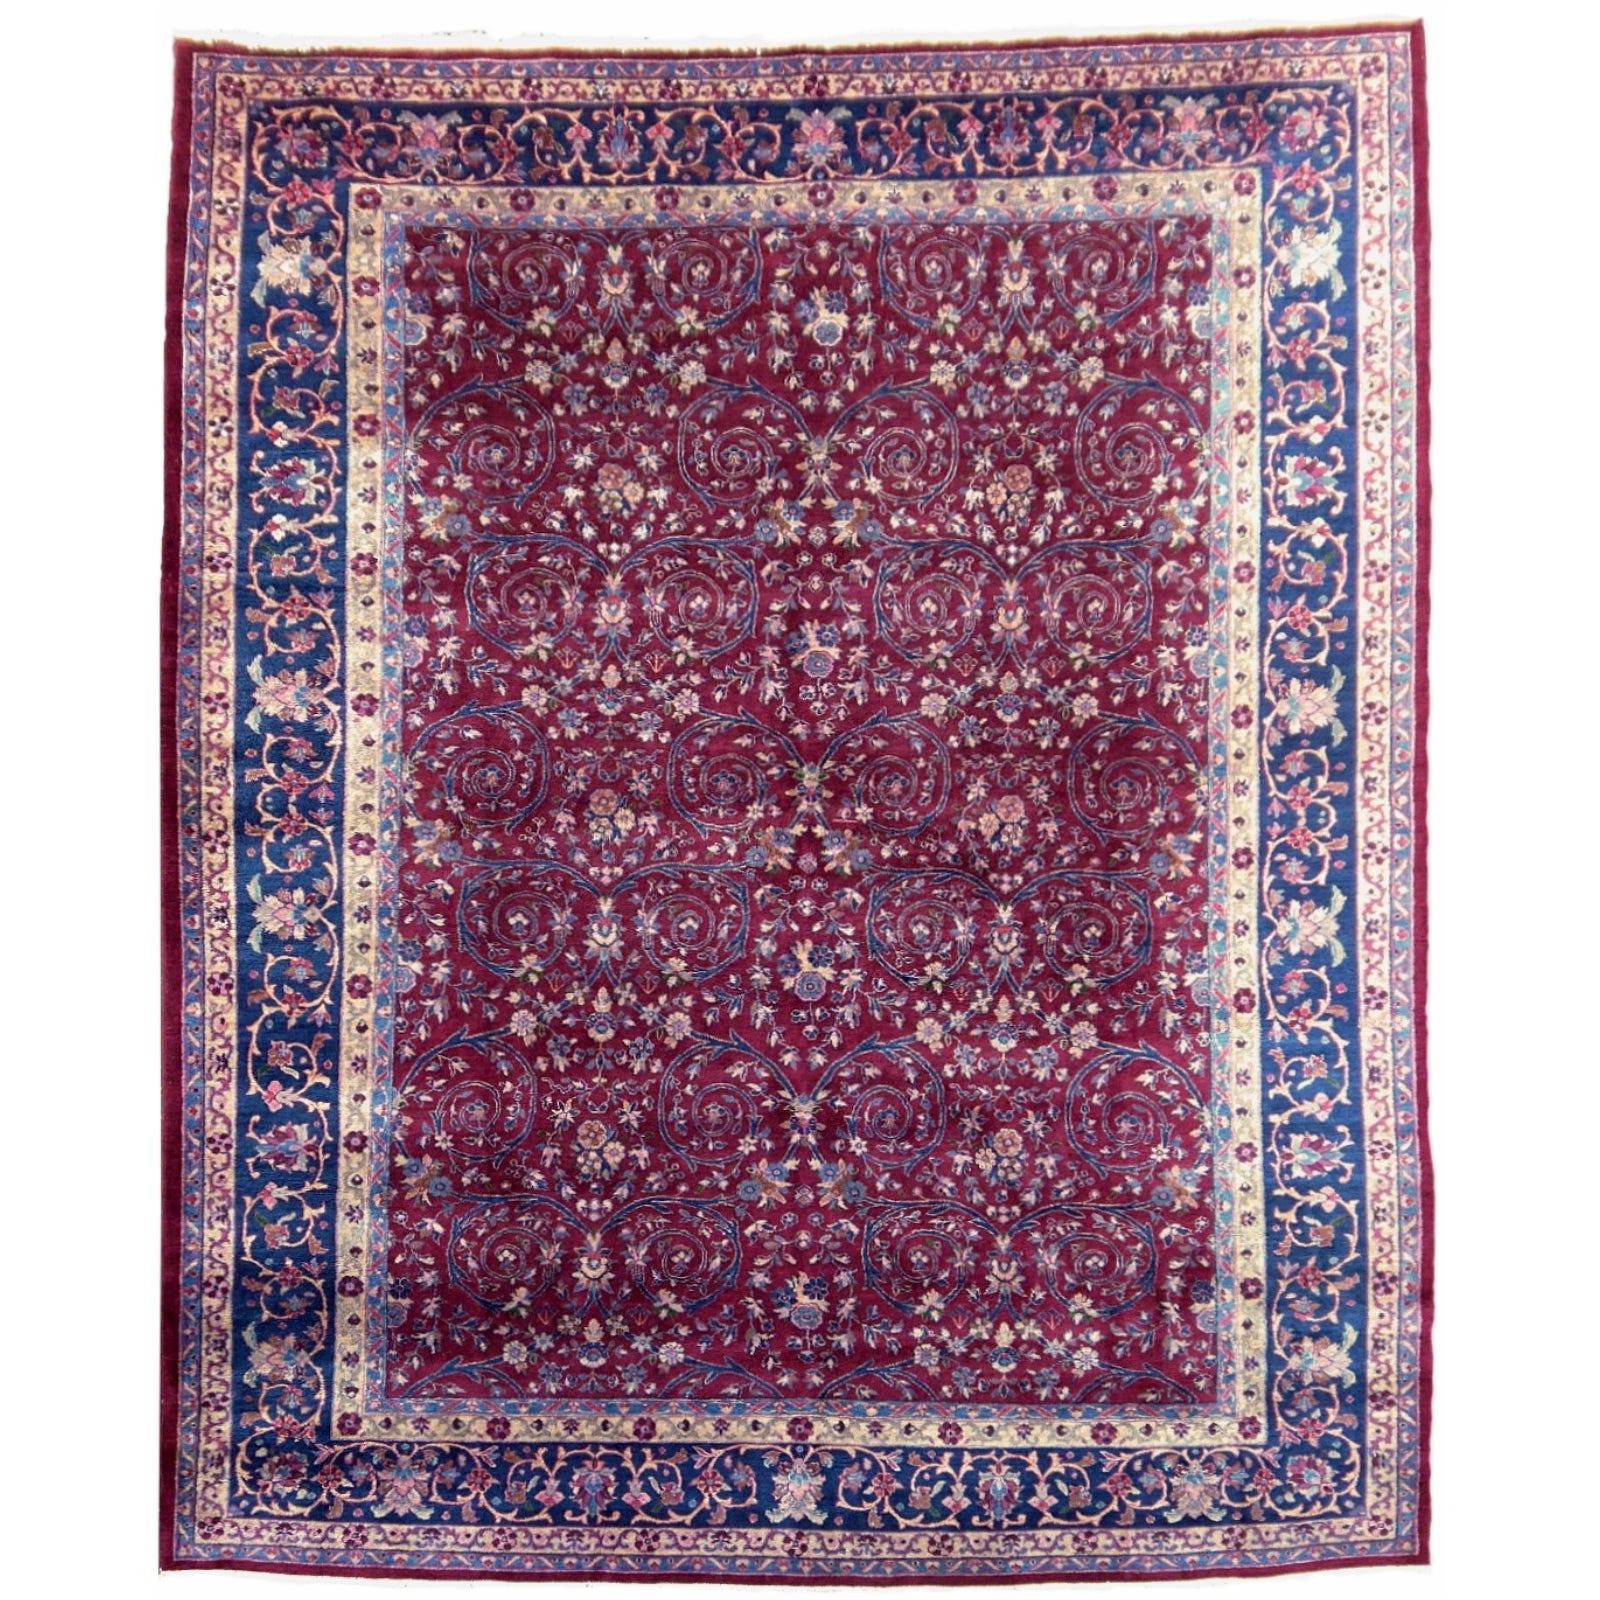 Agra Antique Rug in Purple Berry and Blue, 12 x 9 ft Djoharian Collection For Sale